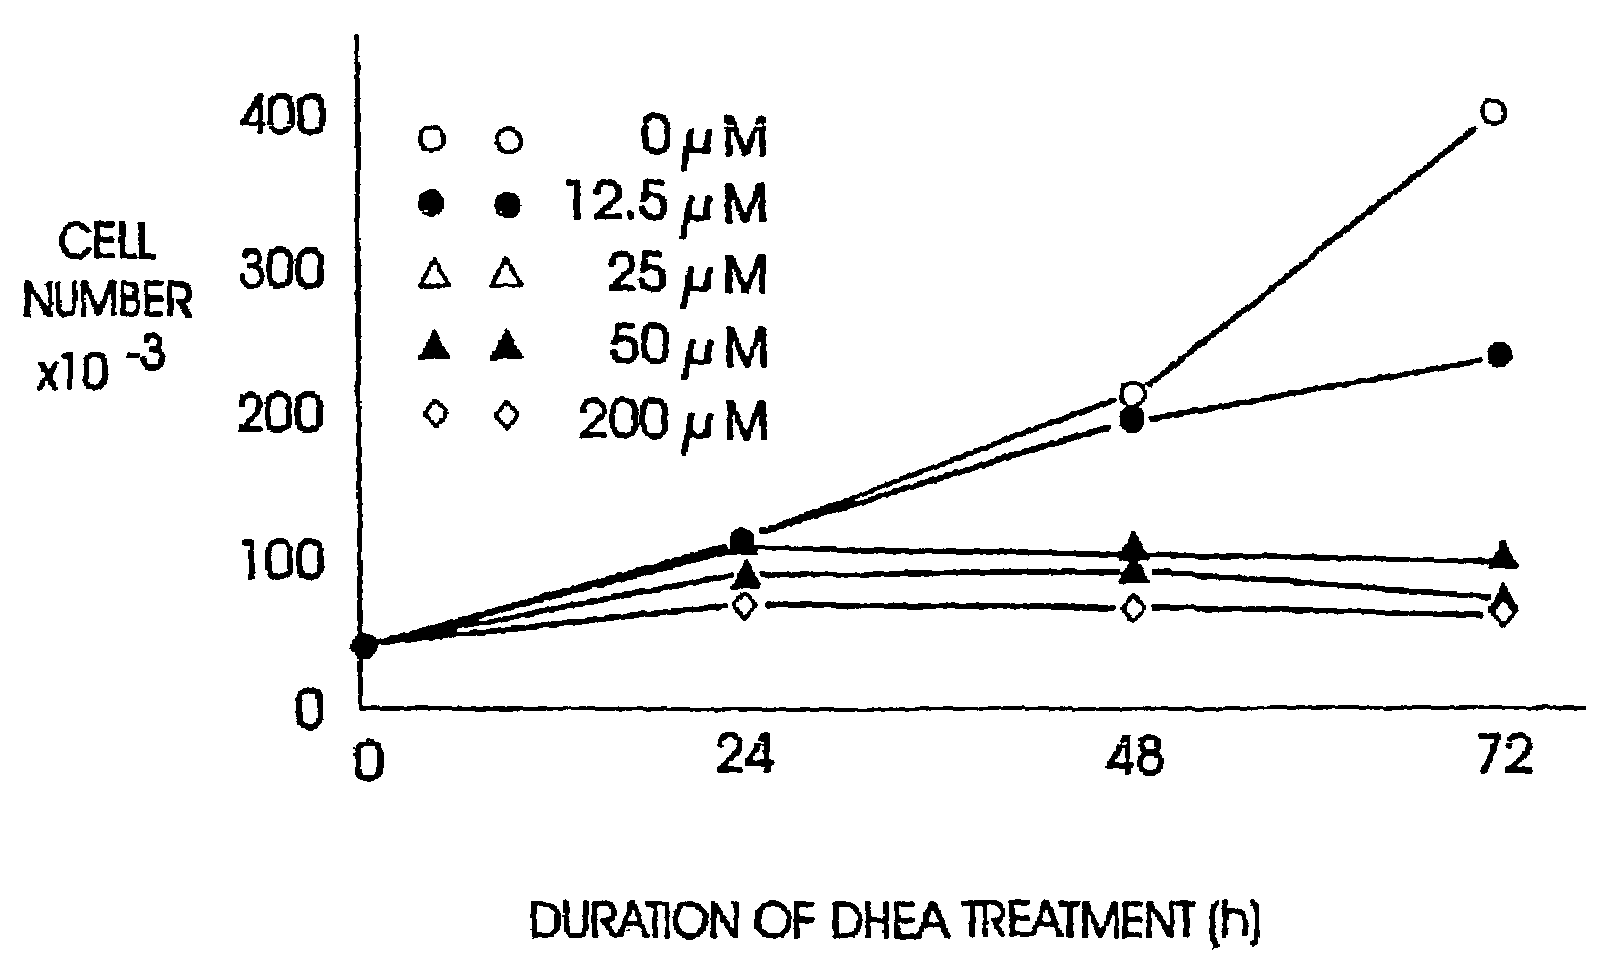 Use of DHEA and DHEA-sulfate for the treatment of chronic obstructive pulmonary disease